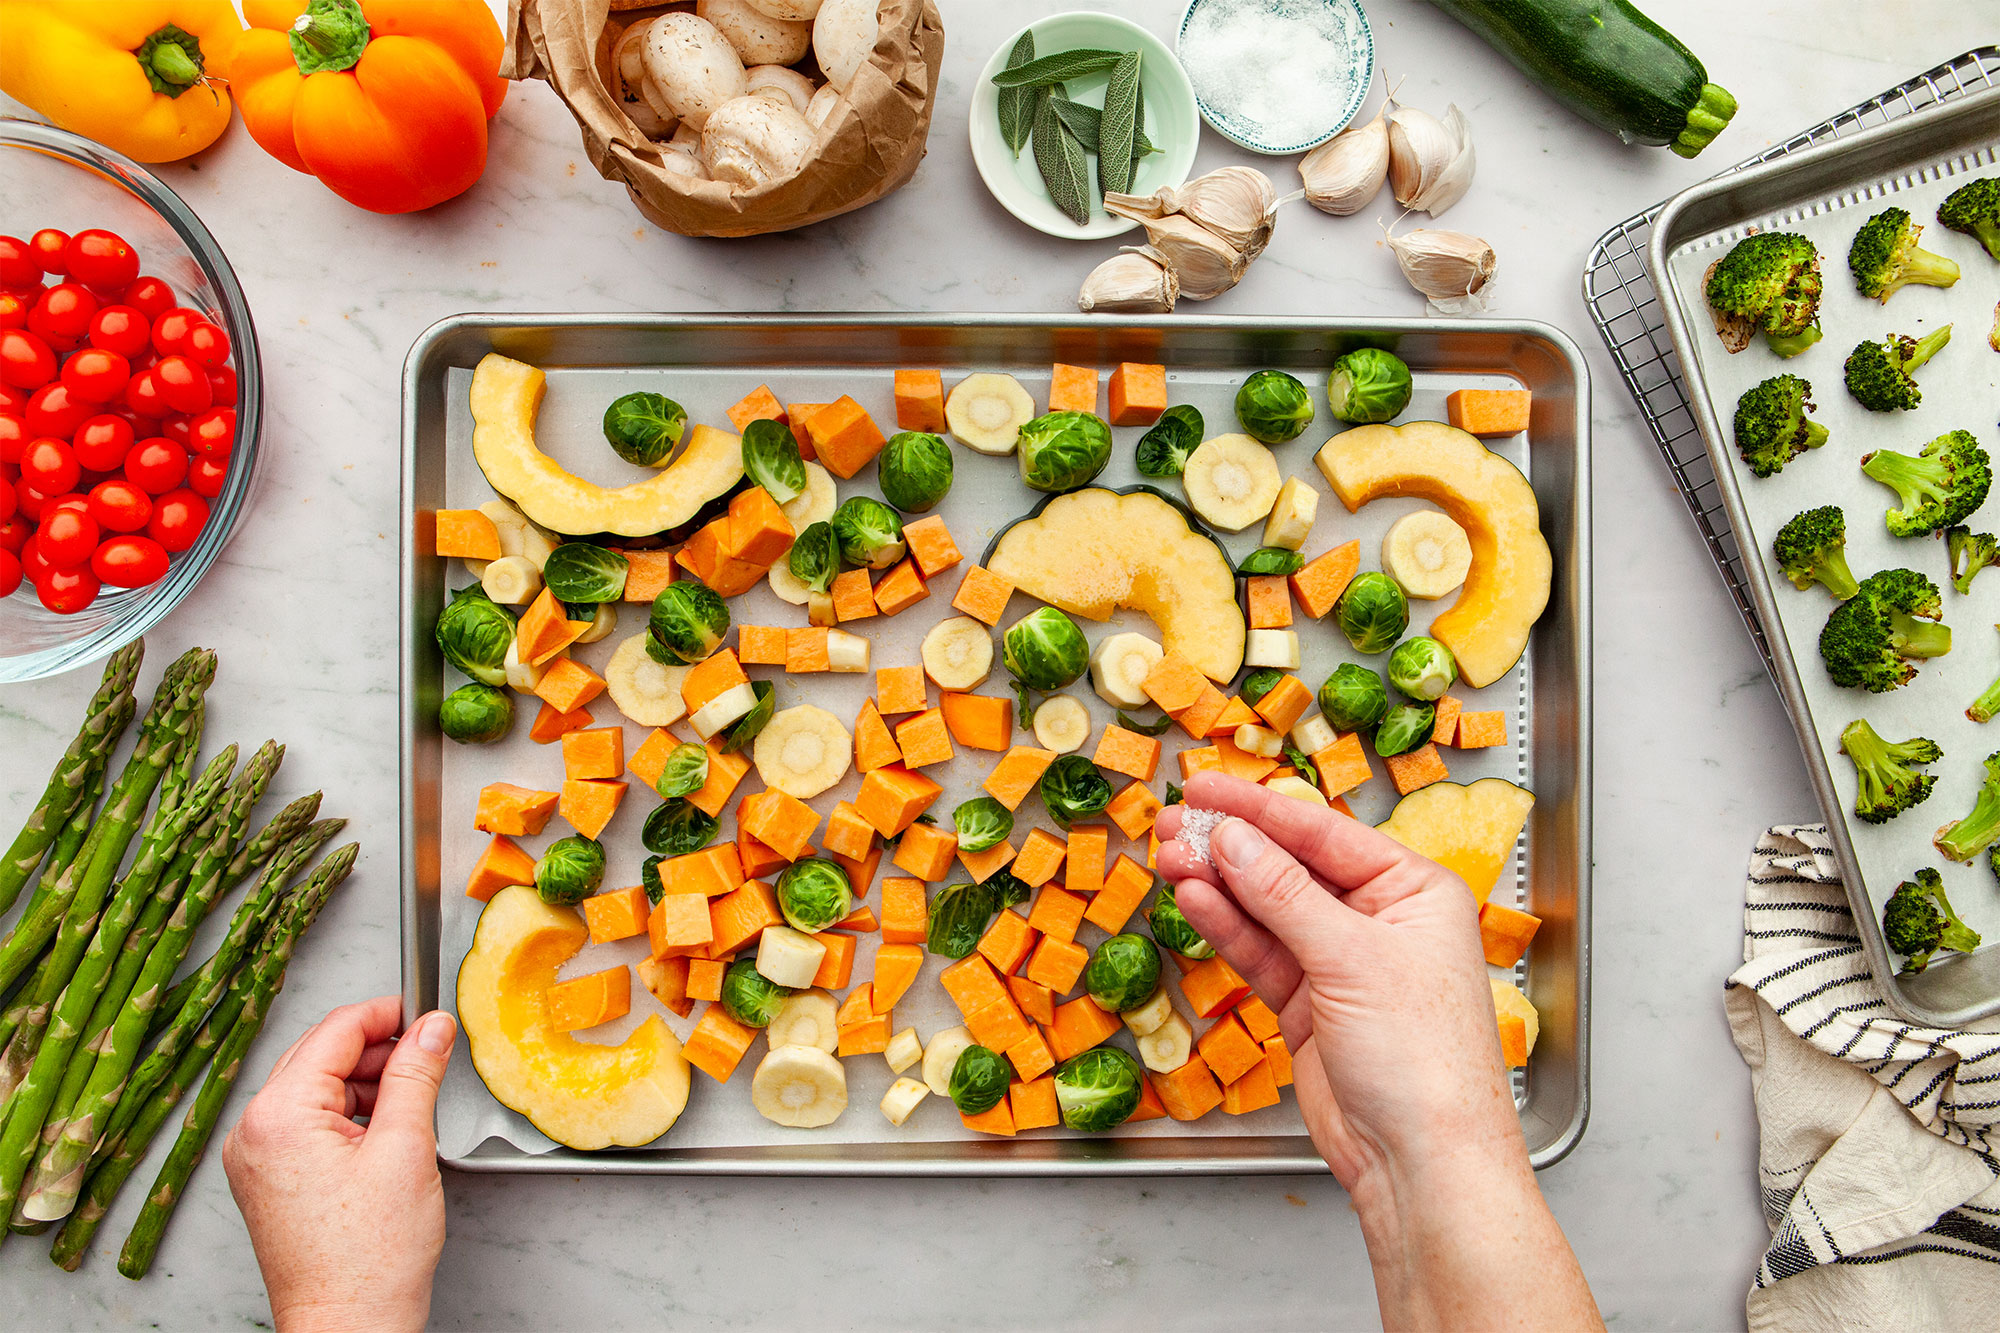 Laying the harder vegetables on the sheet pan as the first layer.